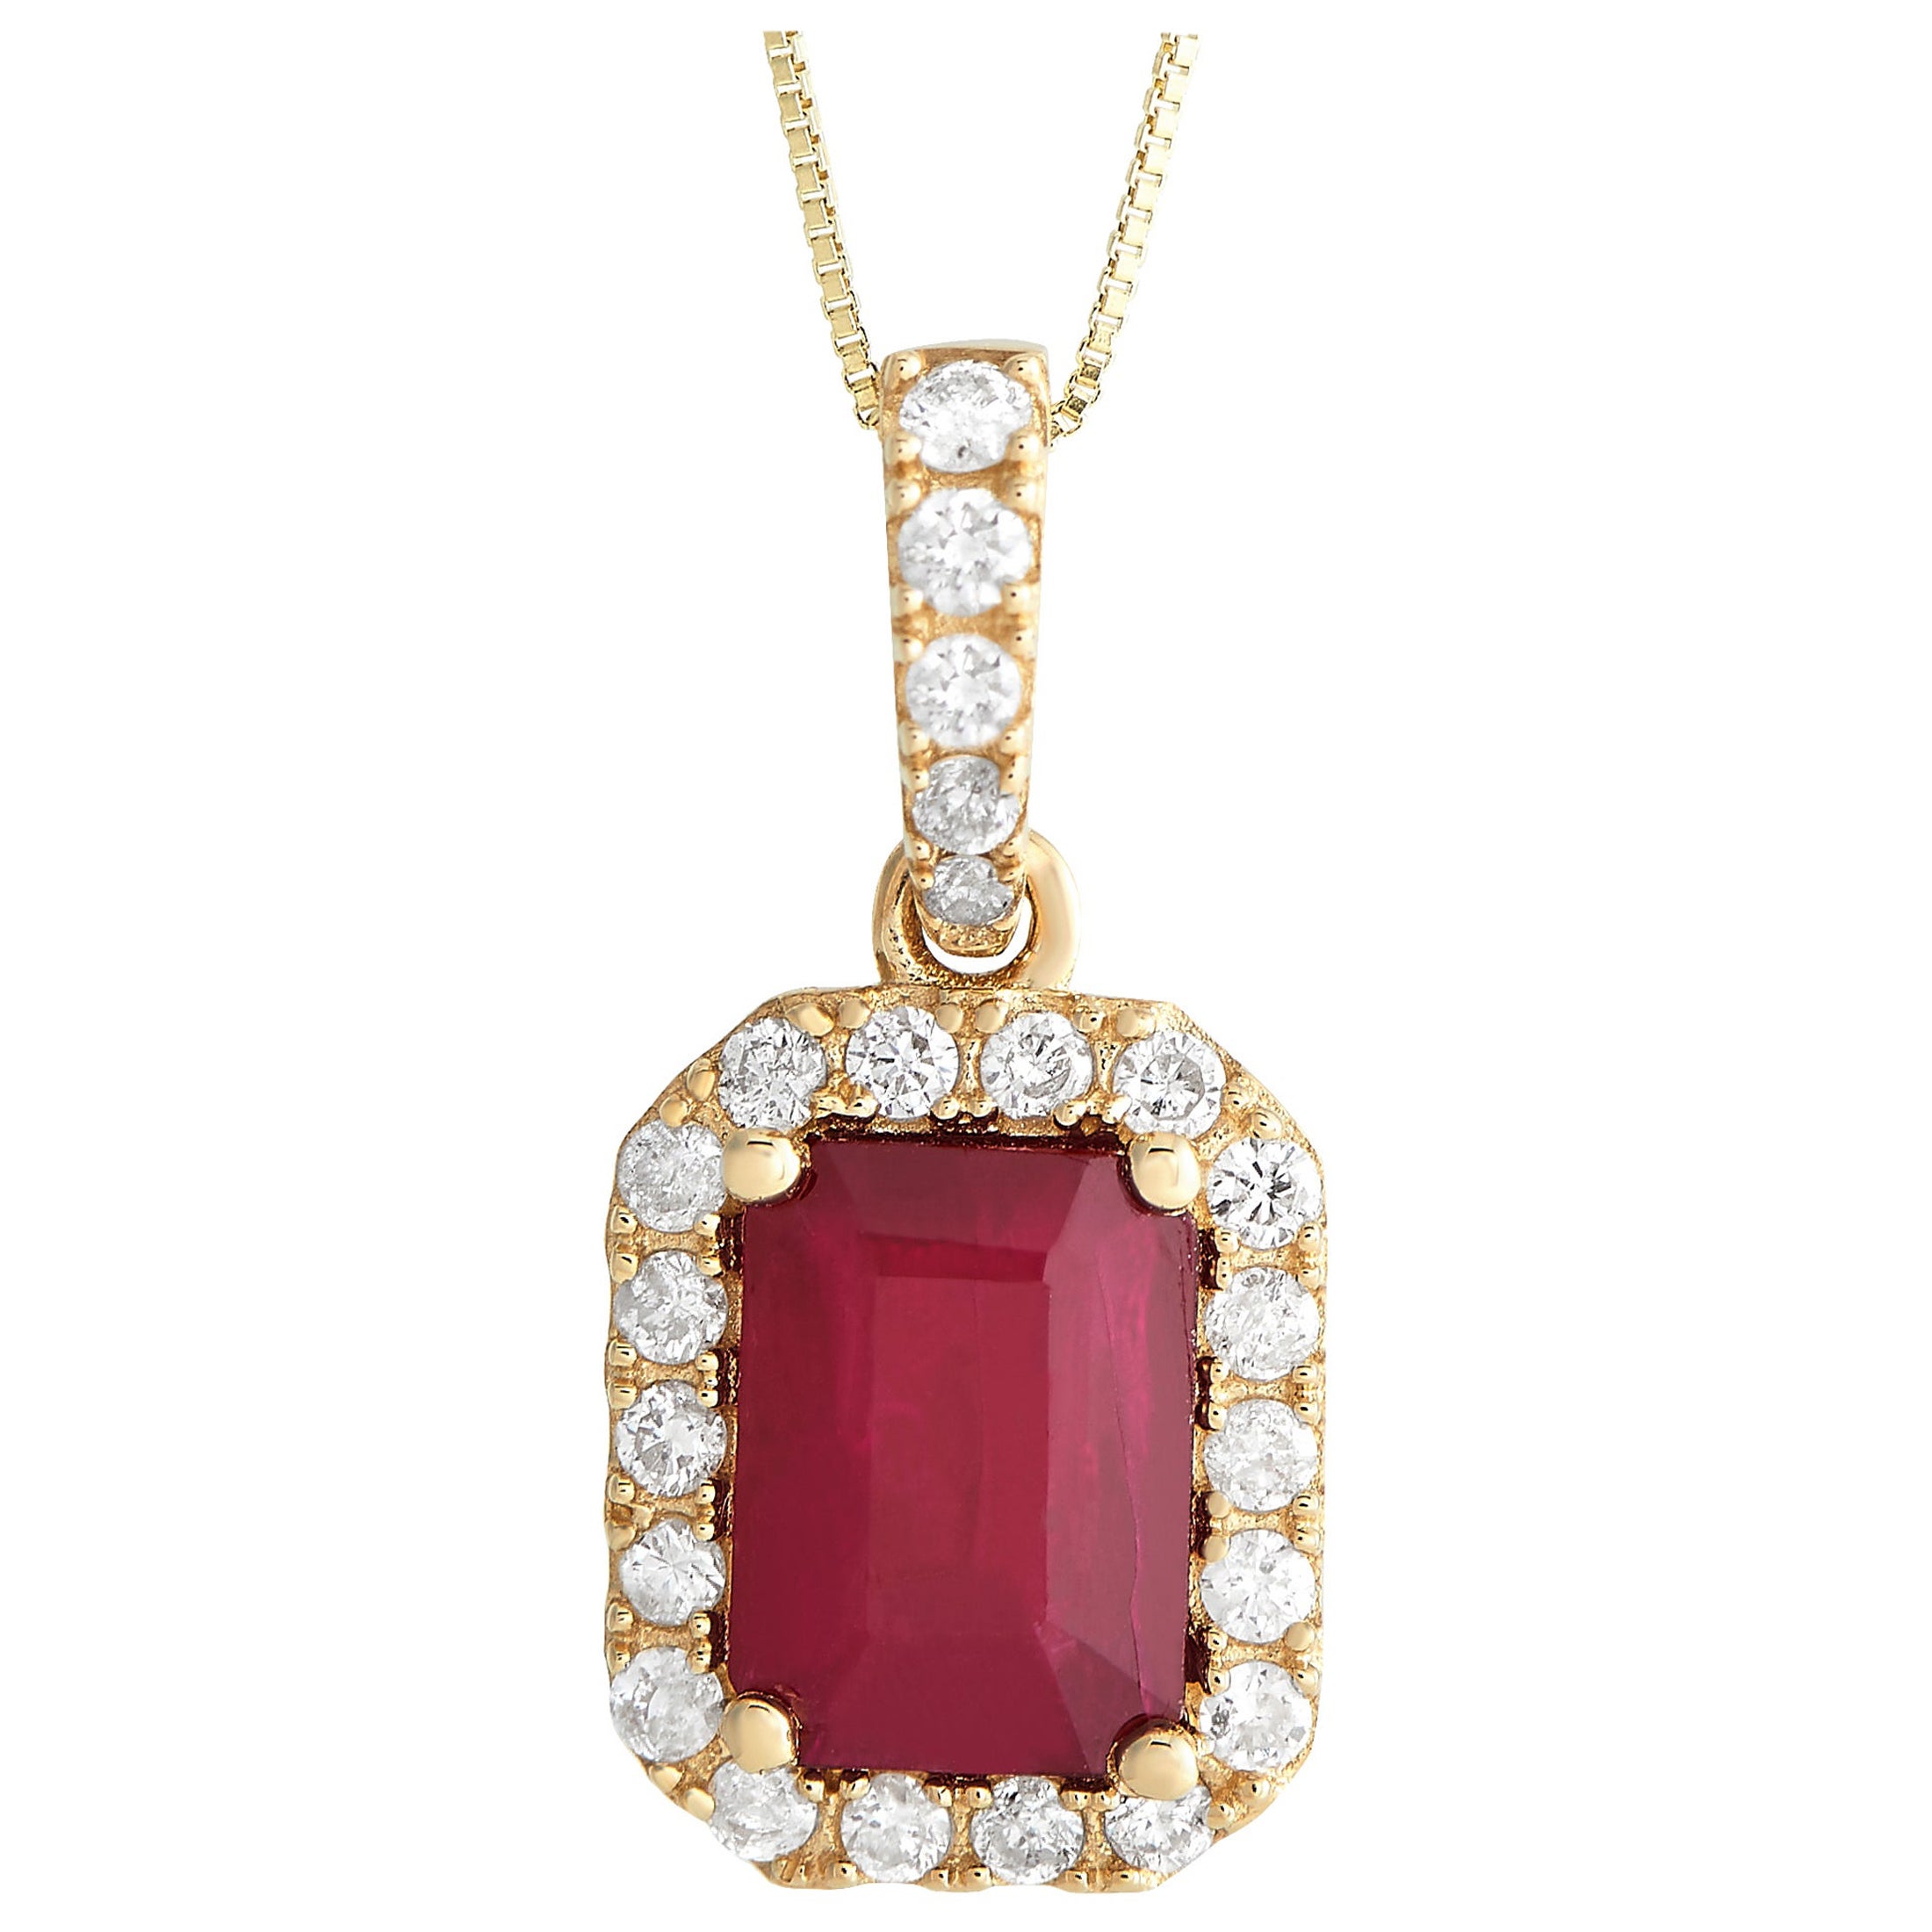 LB Exclusive 14K Yellow Gold 0.20ct Diamond & Ruby Pendant Necklace PD4-15910YRU For Sale